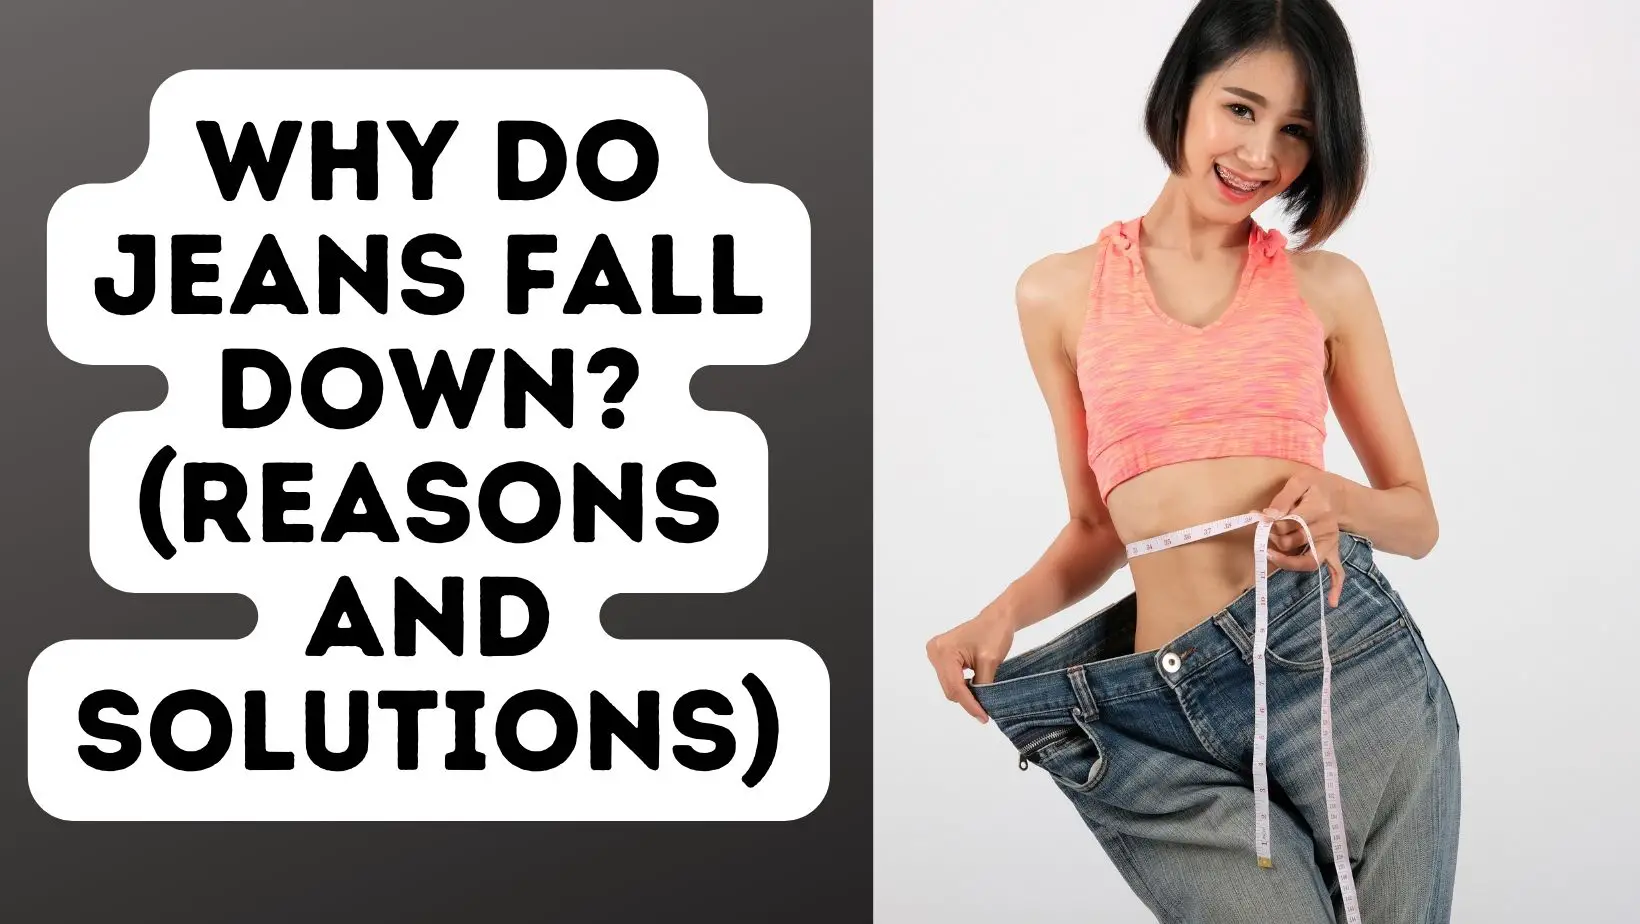 Why Do Jeans Fall Down? (Reasons/Solutions)